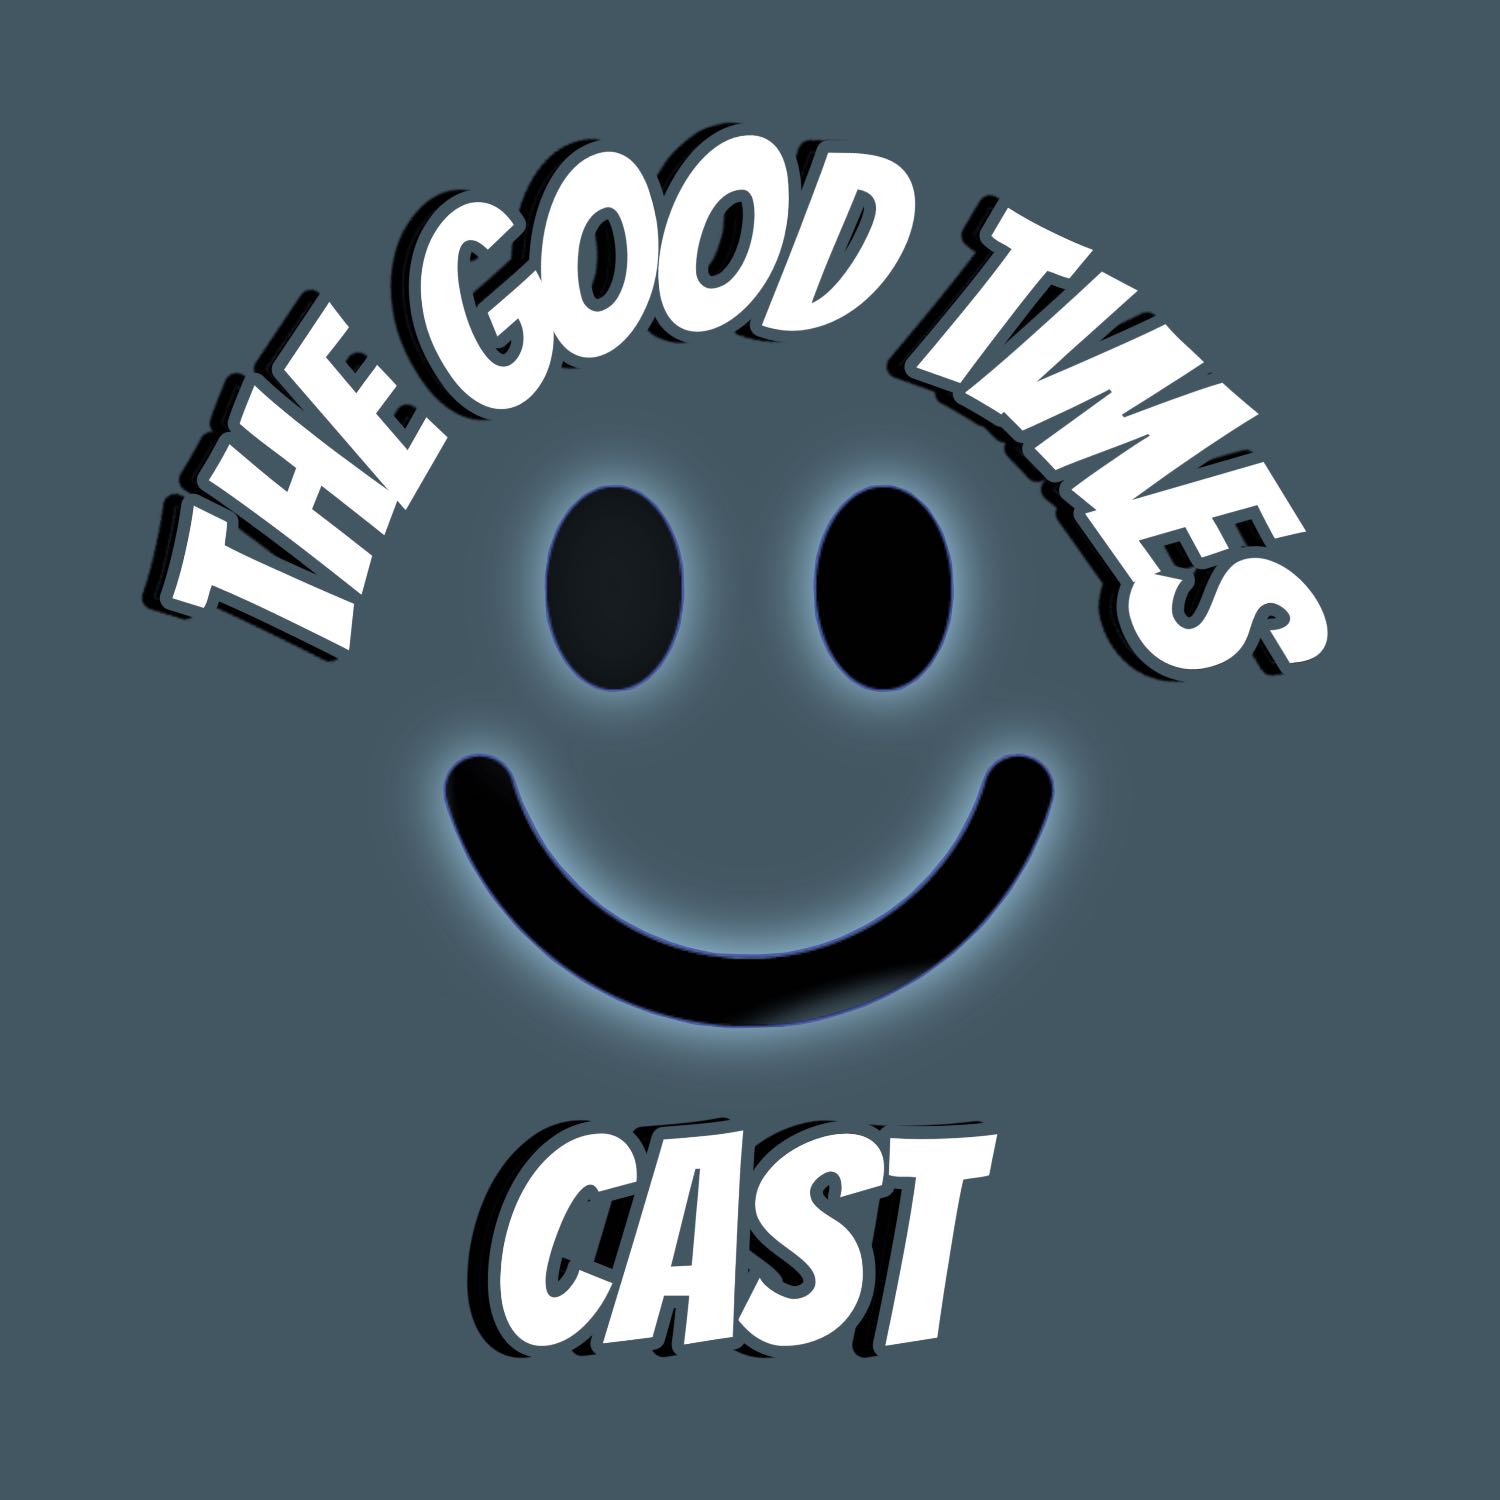 The Good Times Cast